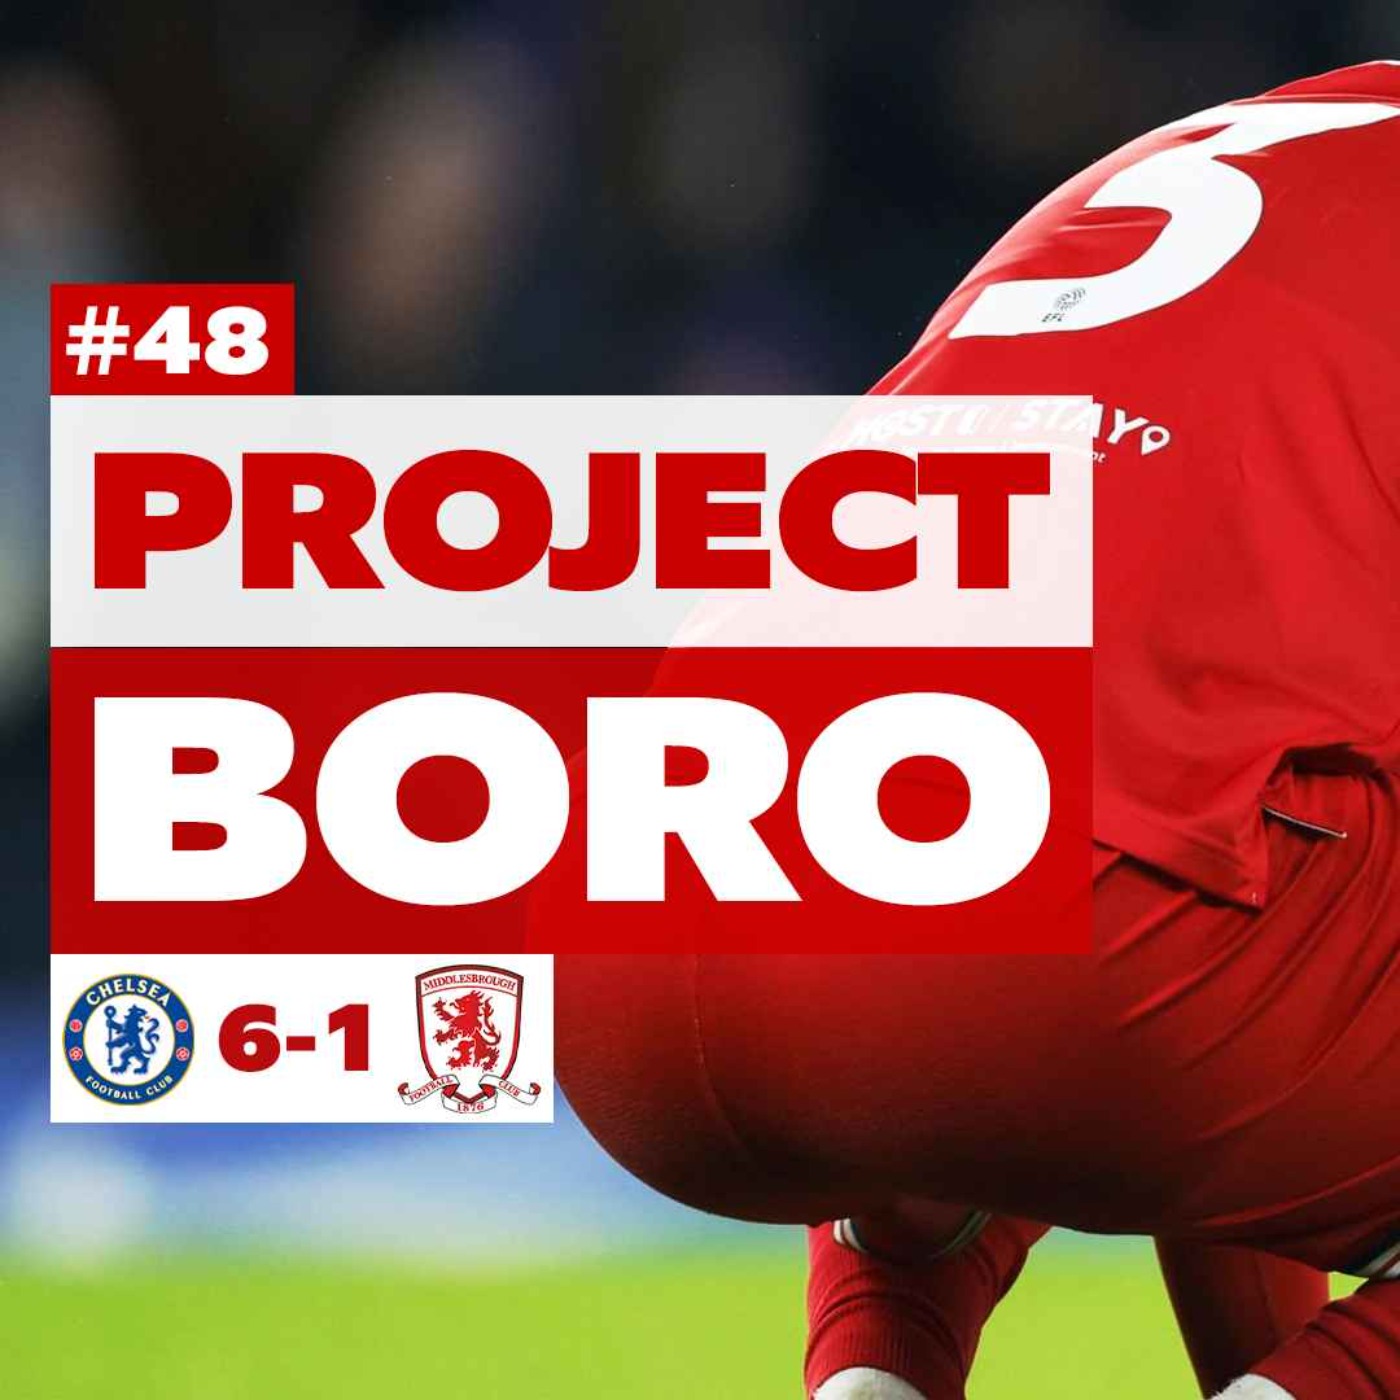 CHELSEA DESTROY BORO & SMASH THEM OUT OF THE LEAGUE CUP! | Chelsea 6-1 Middlesbrough - Project Boro #48